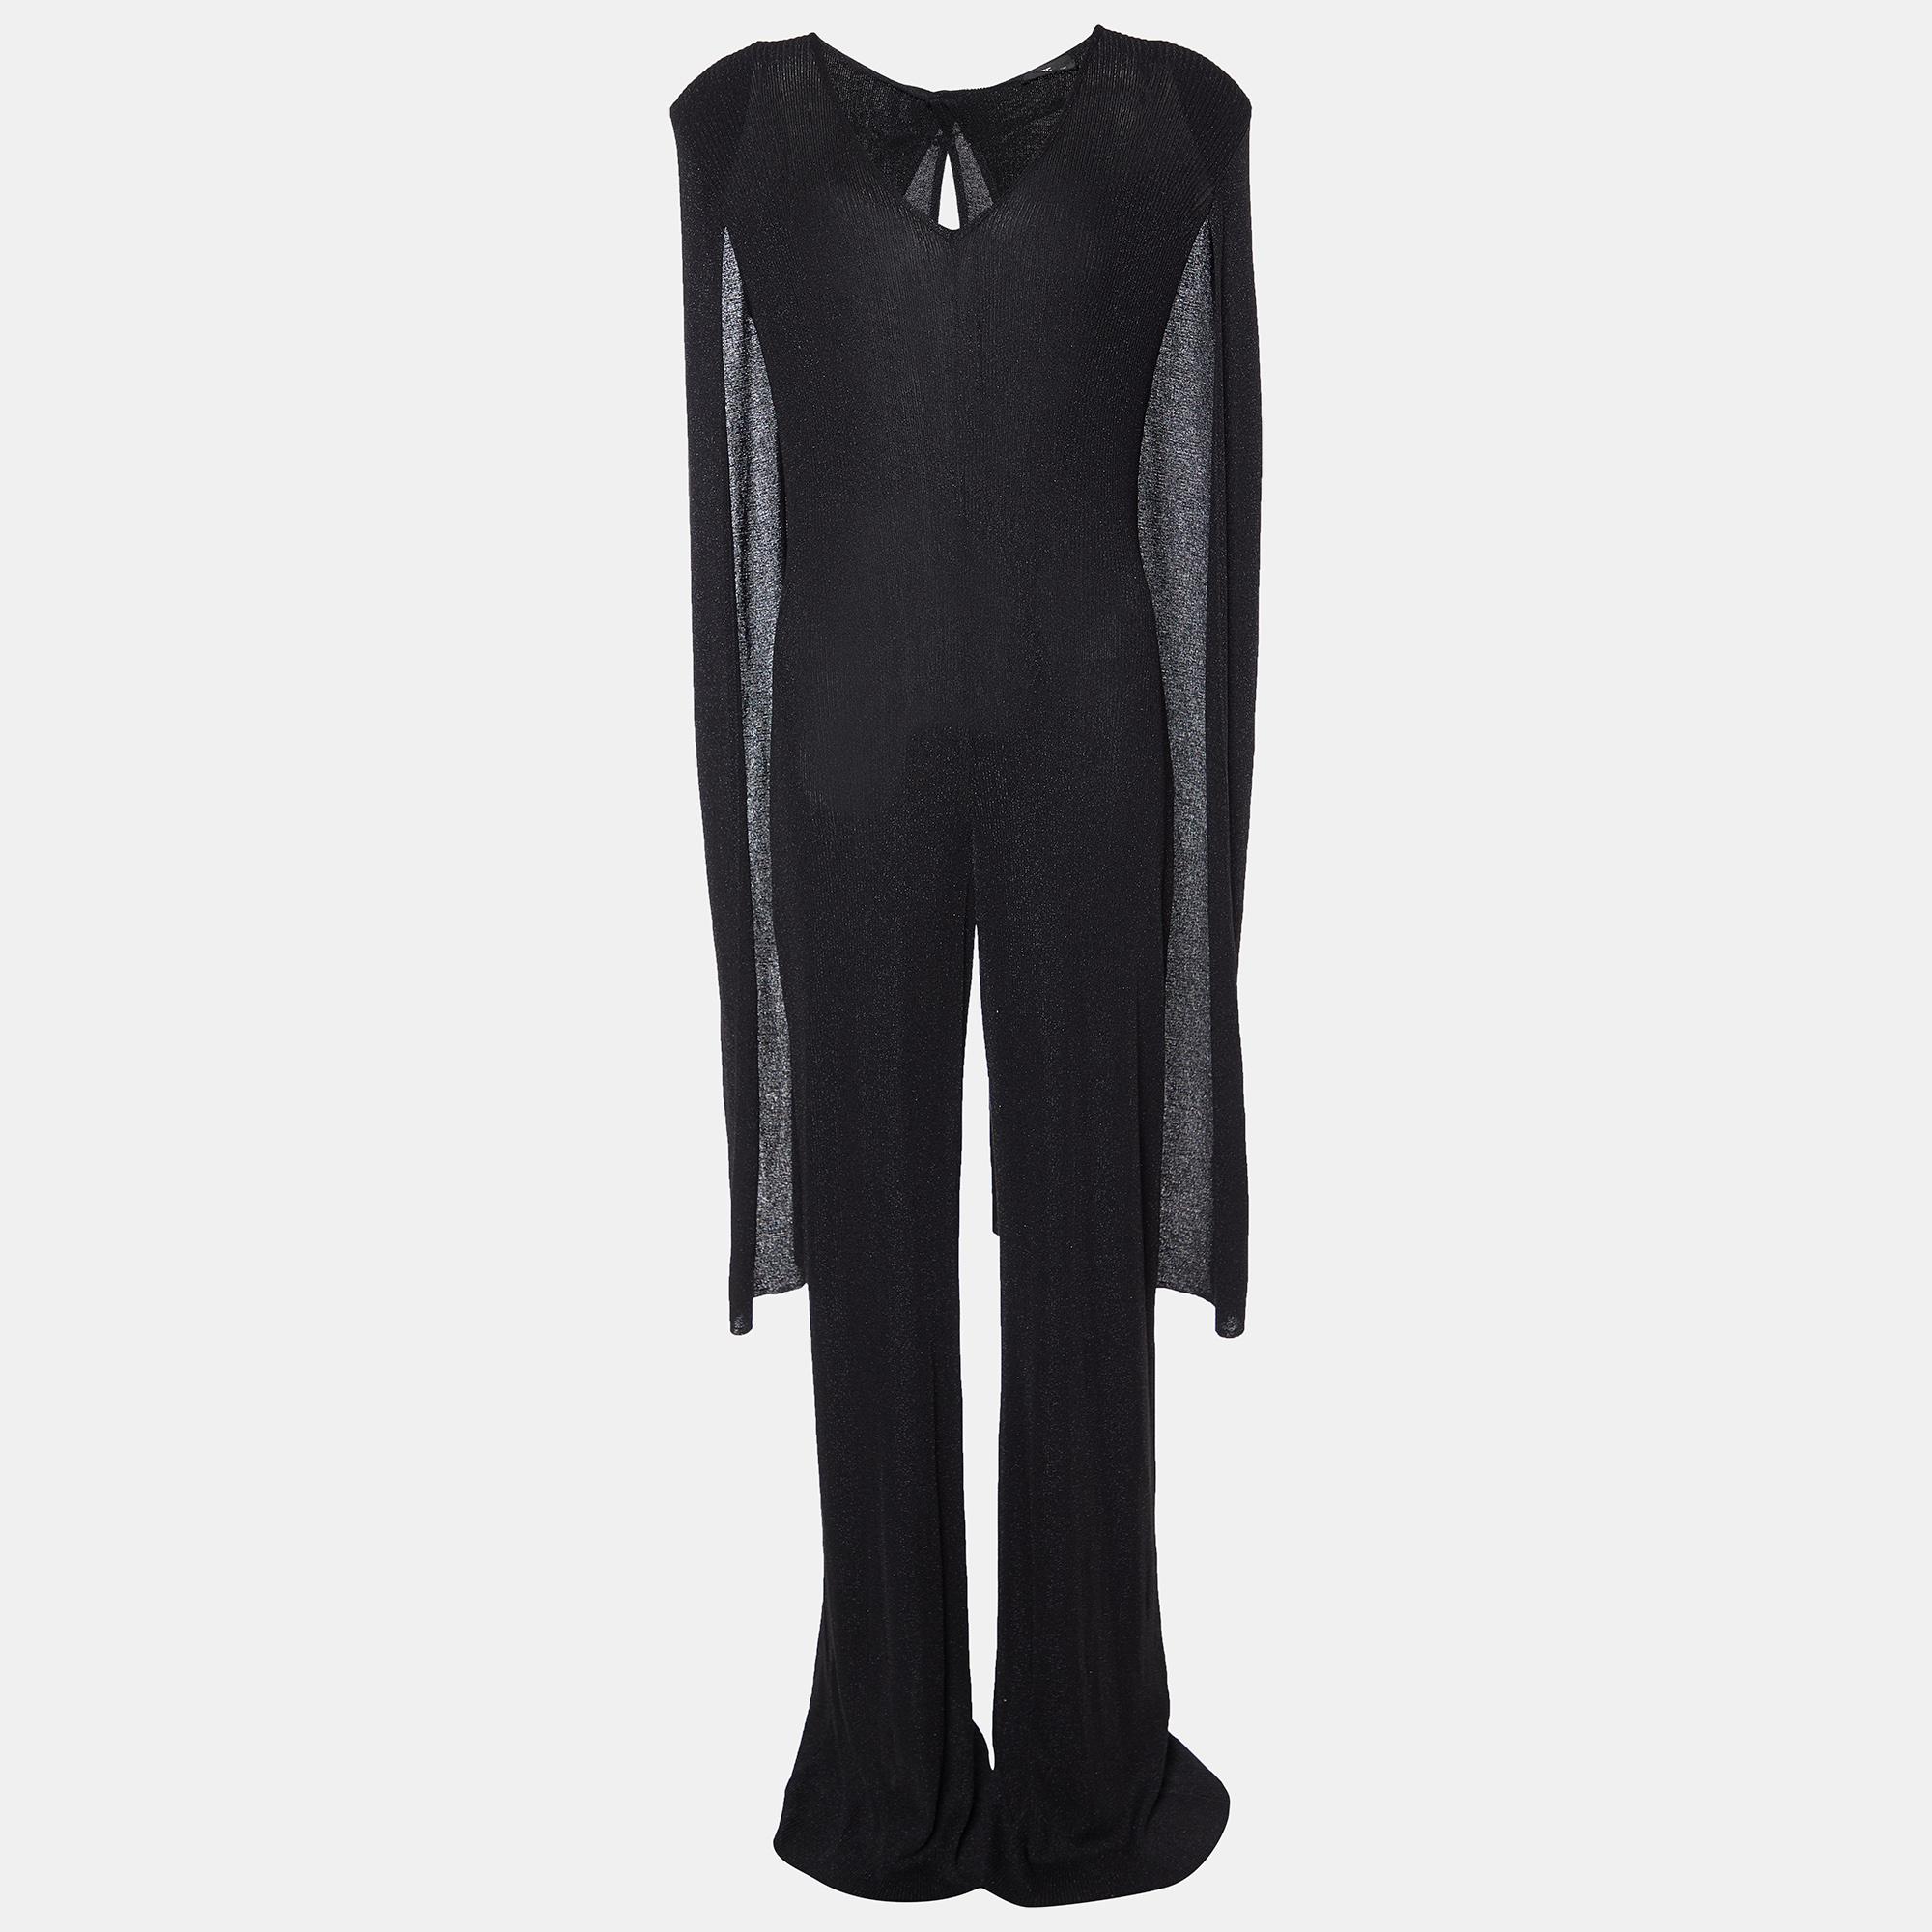 Its time you got a gorgeous jumpsuit and what better than this designer one? It is made of the finest materials. Team it with pumps.